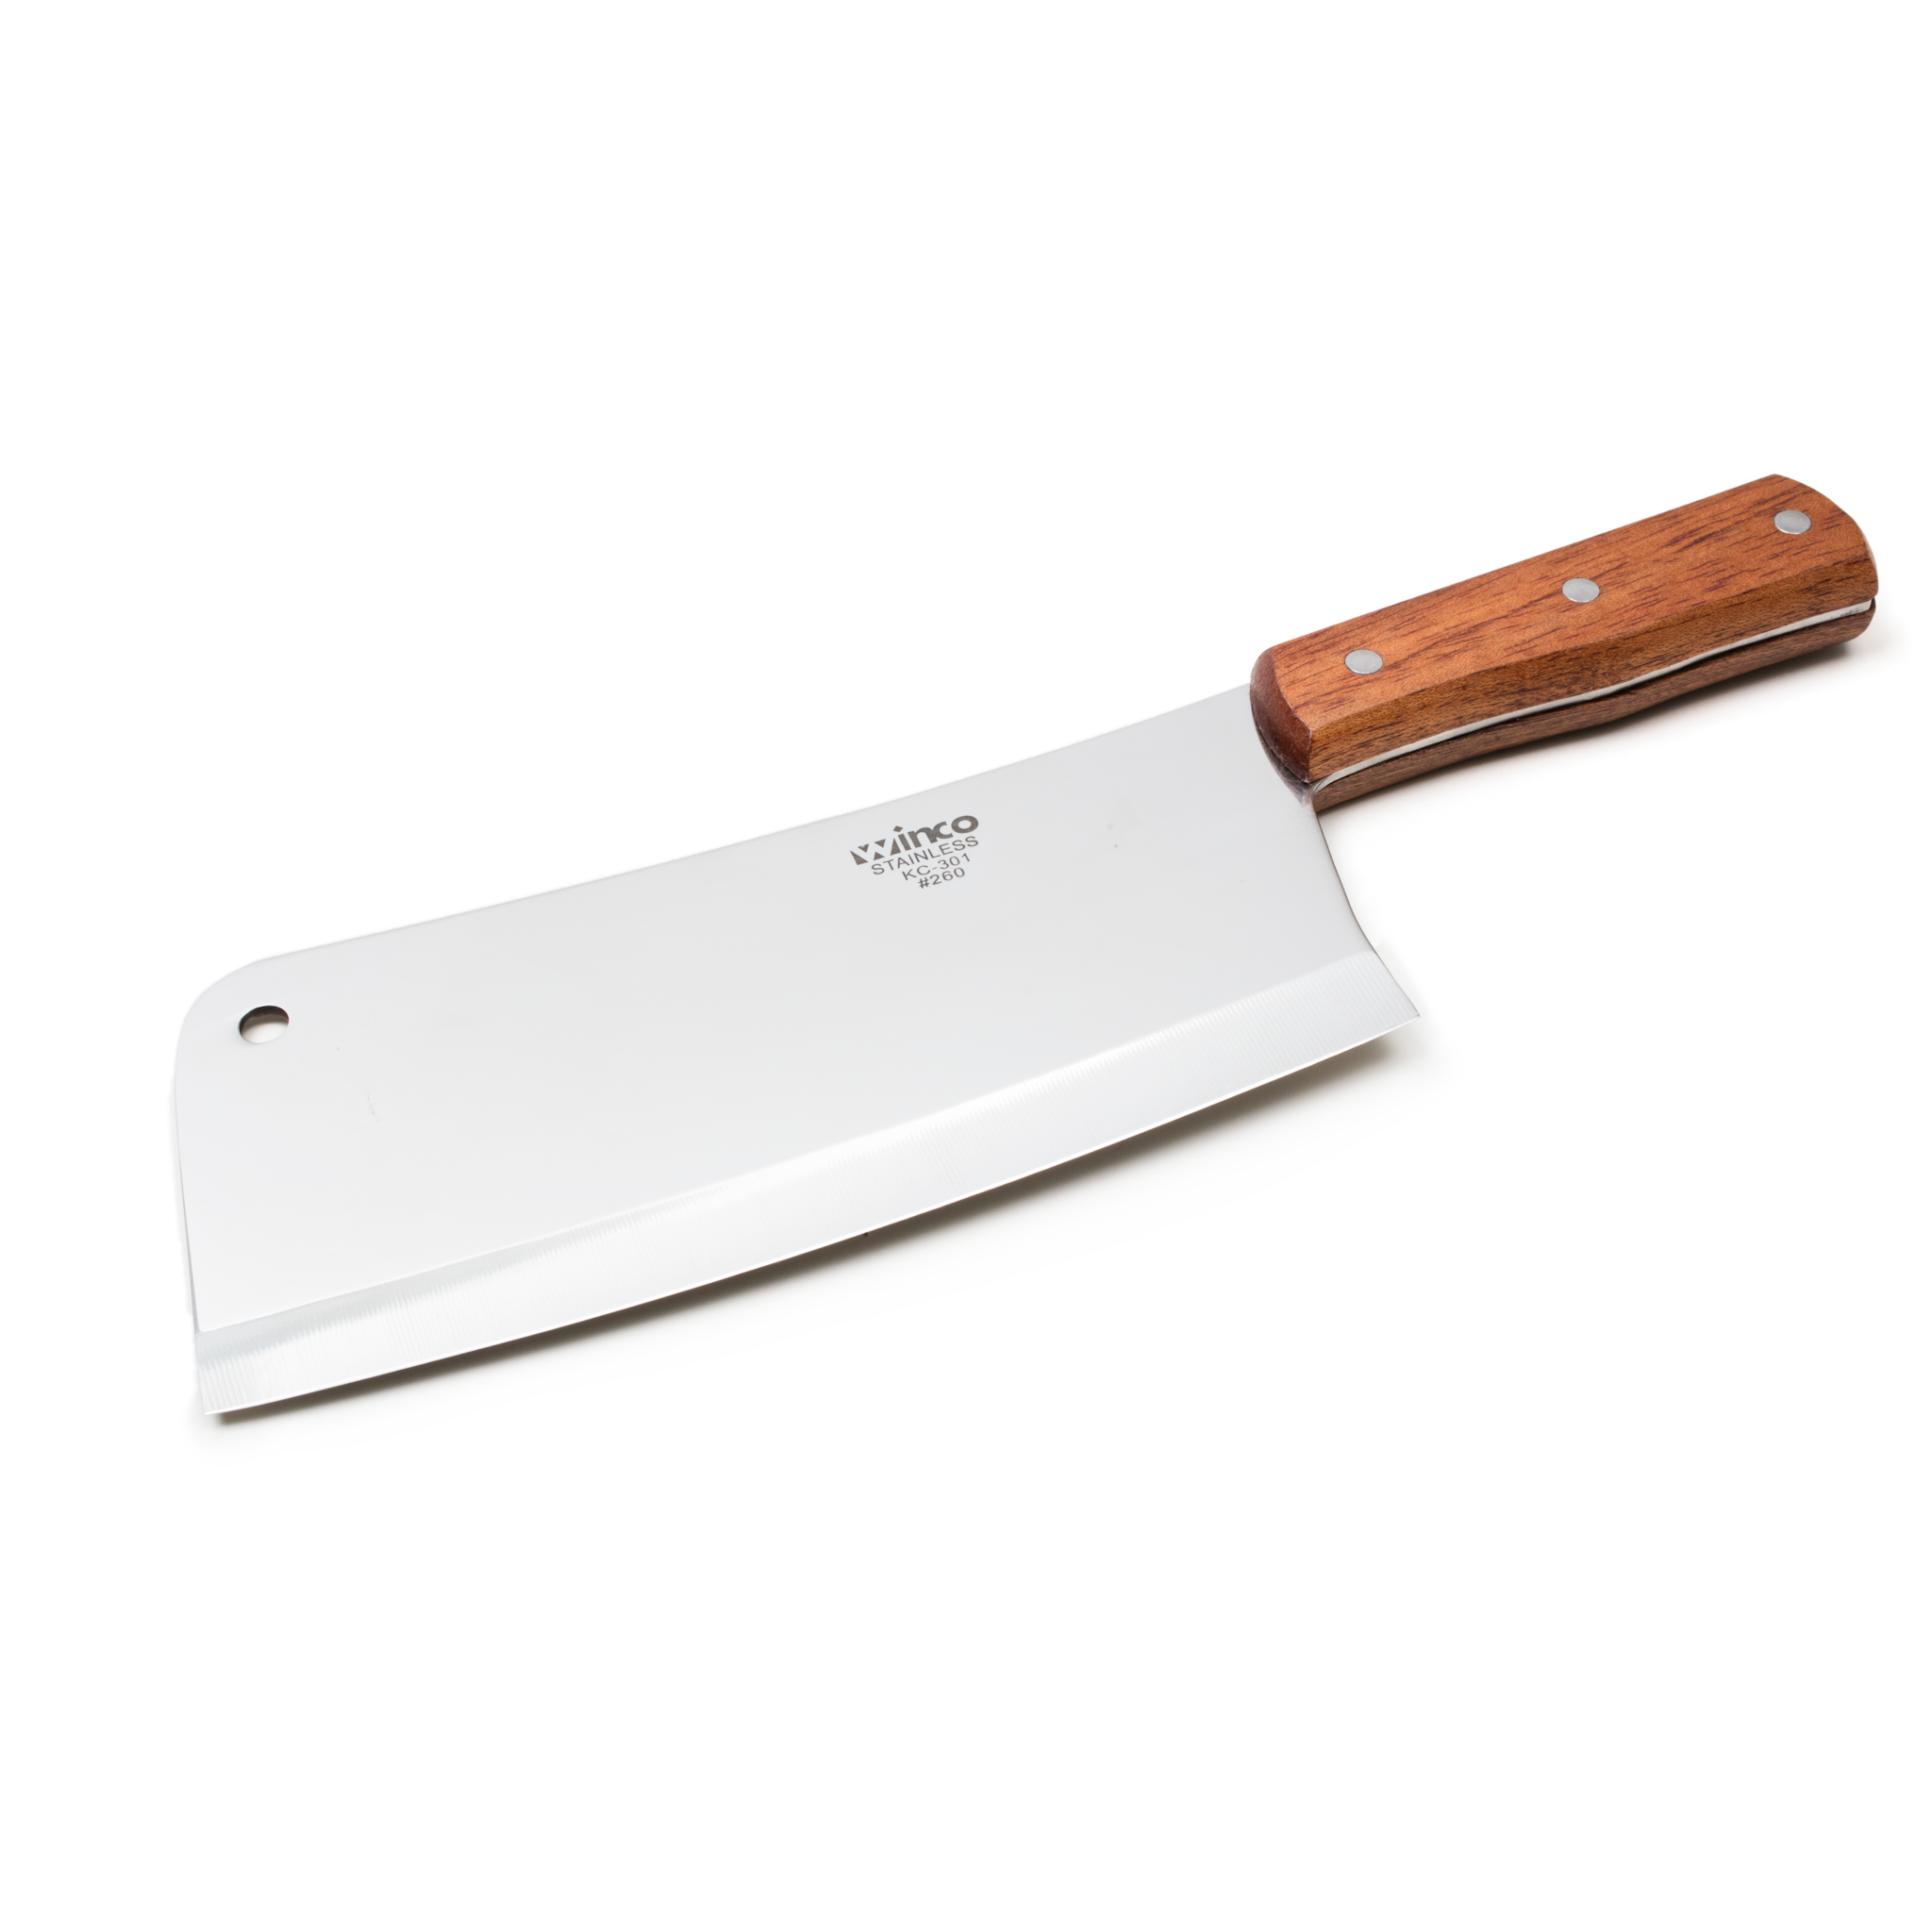 https://res.cloudinary.com/hksqkdlah/image/upload/37819_sil-cleaver-winco-8-inch-chinese-cleaver-with-wooden-handle-kc301.png